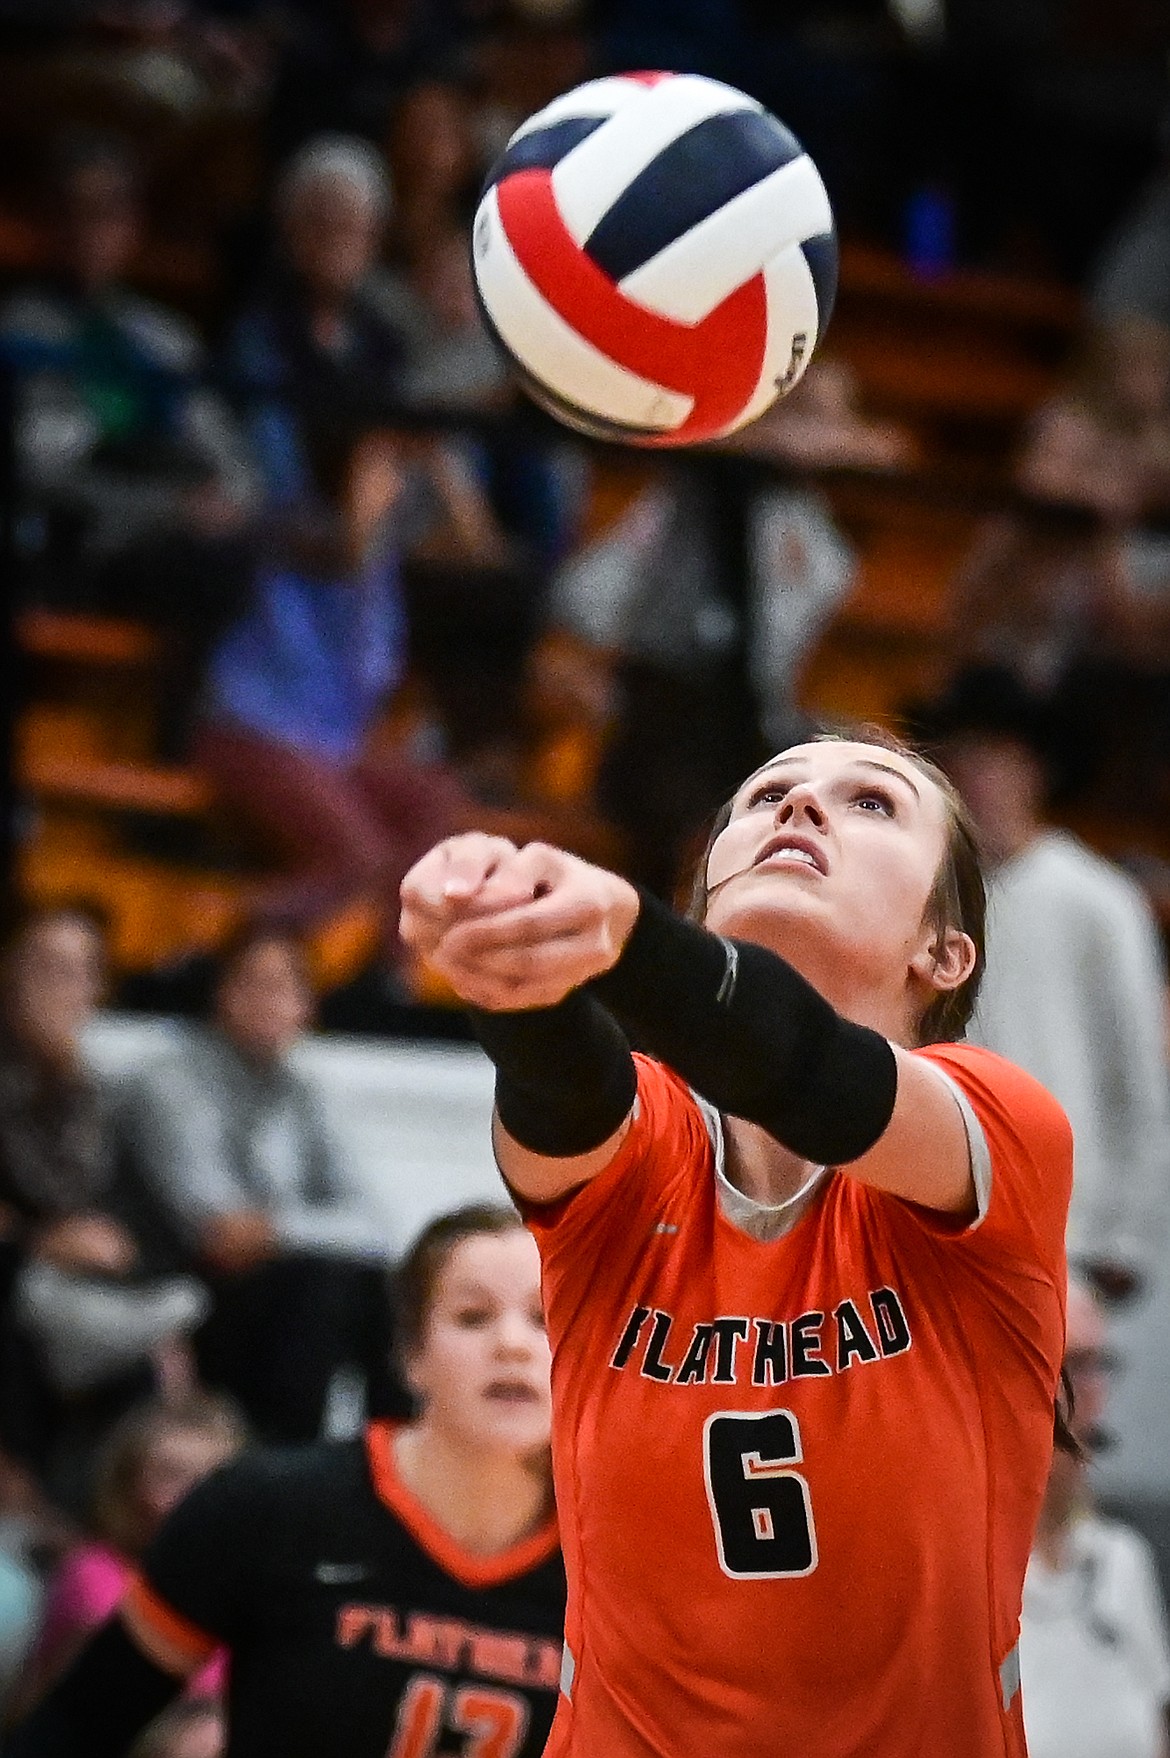 Flathead's Cyan Mooney (6) passes to a teammate as they play Glacier during crosstown volleyball at Flathead High School on Thursday, Sept. 29. (Casey Kreider/Daily Inter Lake)